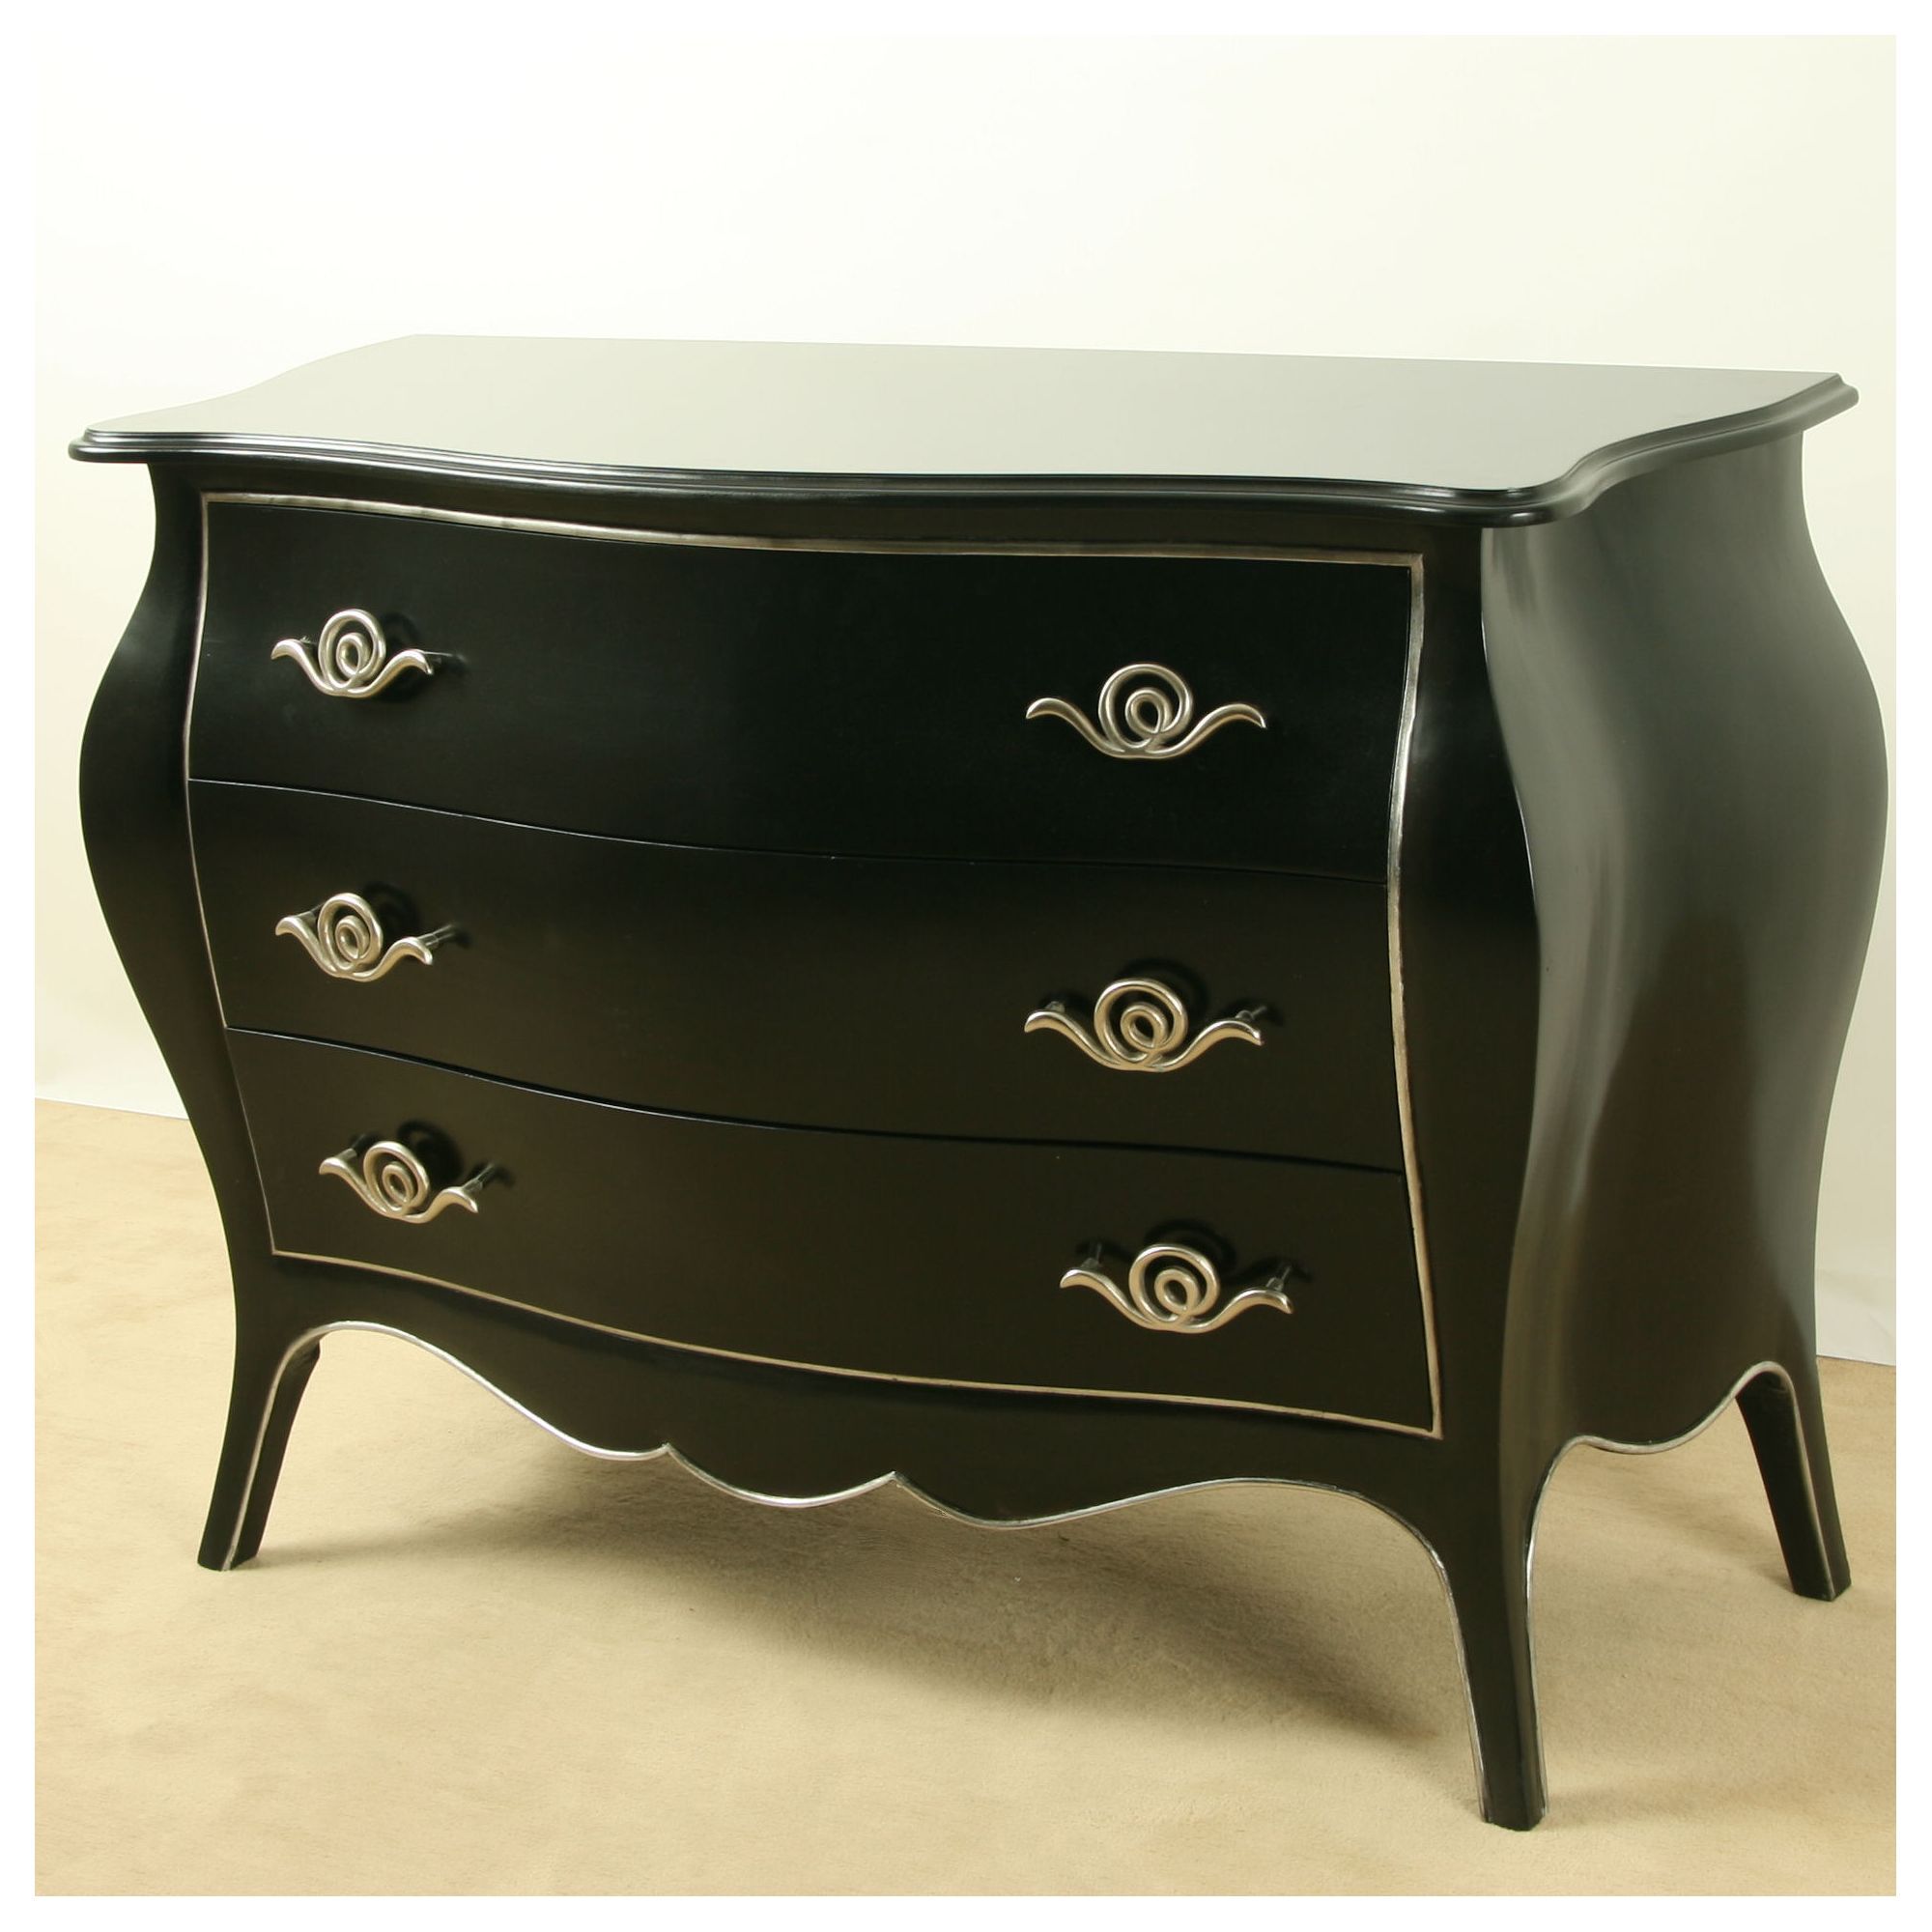 Wildwood Coco Chest of Drawers at Tesco Direct